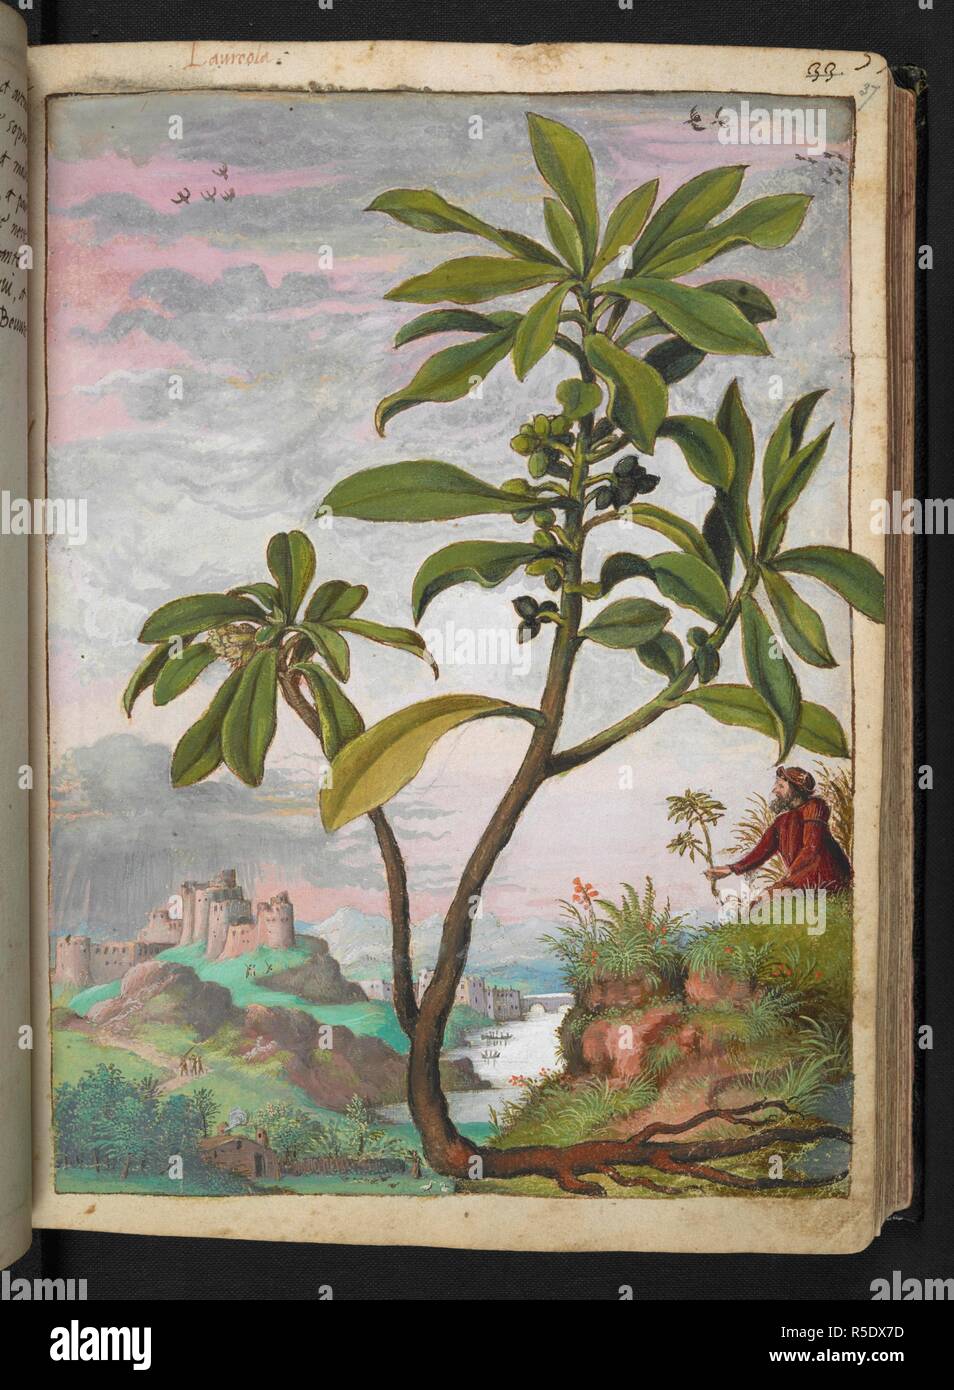 Full page botanical painting of a Daphnoides or 'Daphne Laureola' (Spurge-laurel) with a botanist gathering plants on a mountainside and a fortified town and river in the background. Coloured drawings of plants, copied from nature in the Roman States, by Gerardo Cibo. Vol. I. Pietro Andrea Mattioli, Physician, of Siena: Extracts from his edition of Dioscorides' 'de re Medica':. Italy, c. 1564-1584. Source: Add. 22332 f.37. Language: Italian. Author: Cibo, Gheraldo. Stock Photo